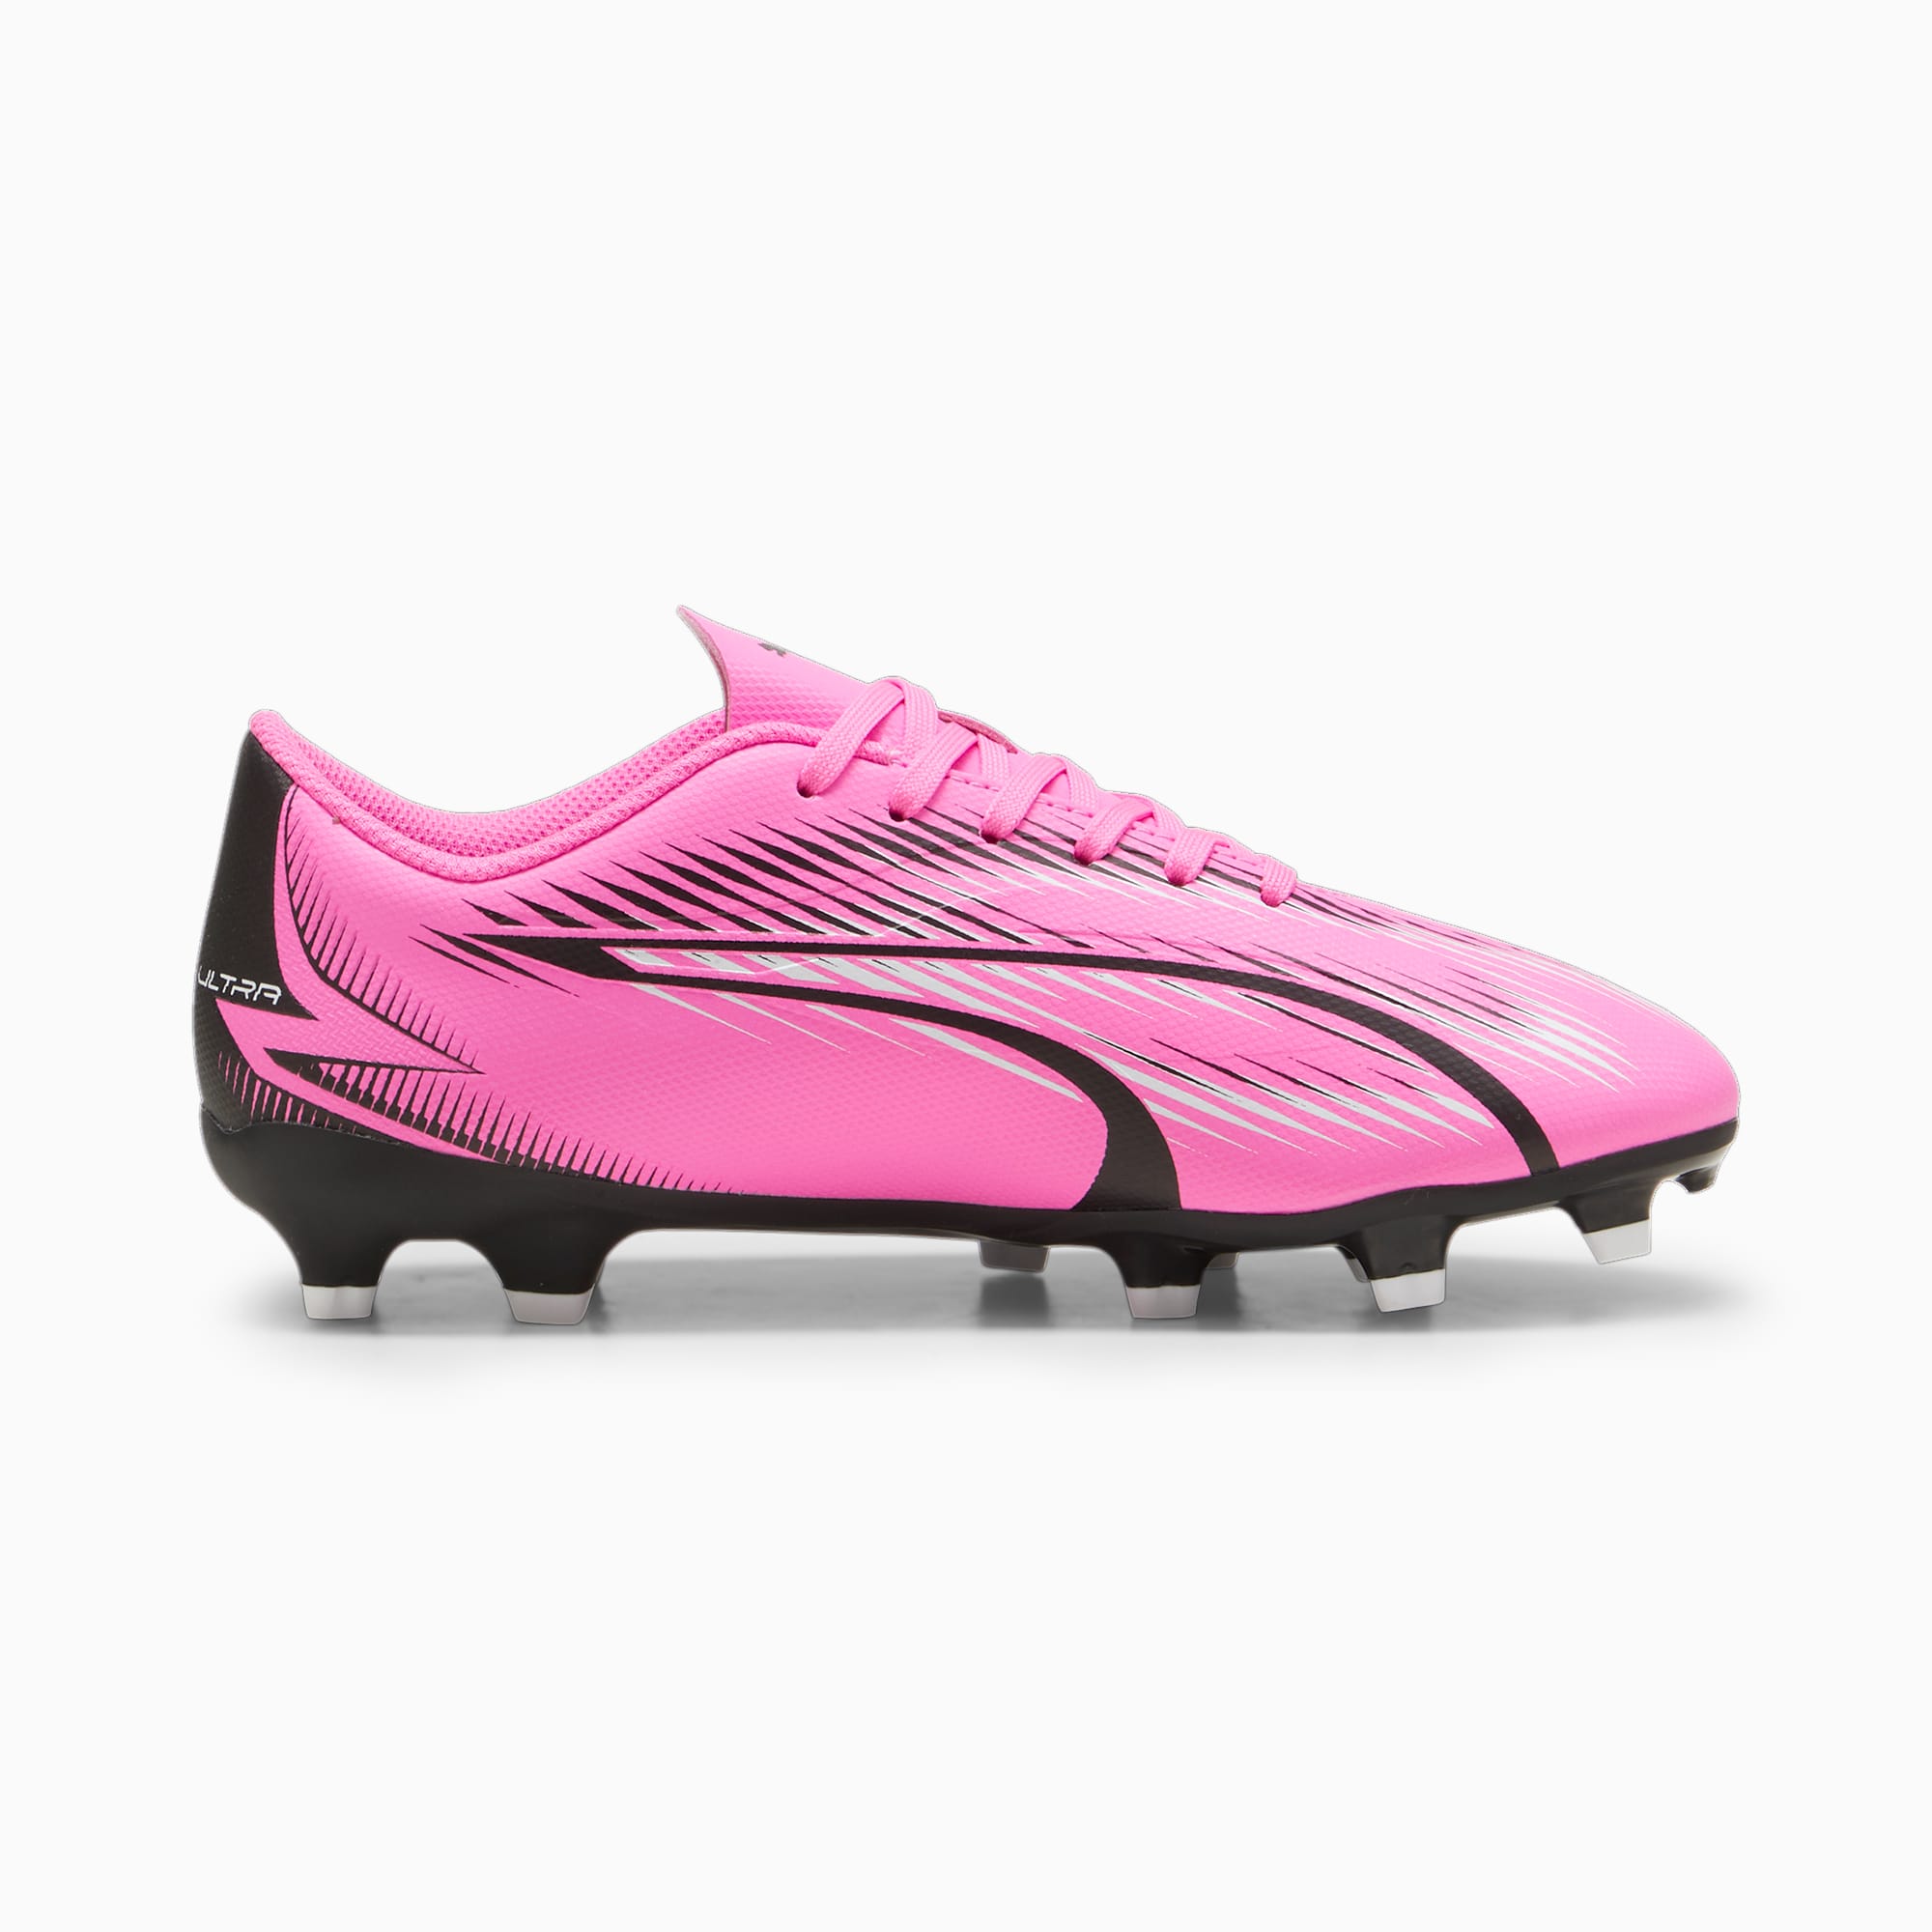 PUMA Ultra Play FG/AG Youth Football Boots, Poison Pink/White/Black